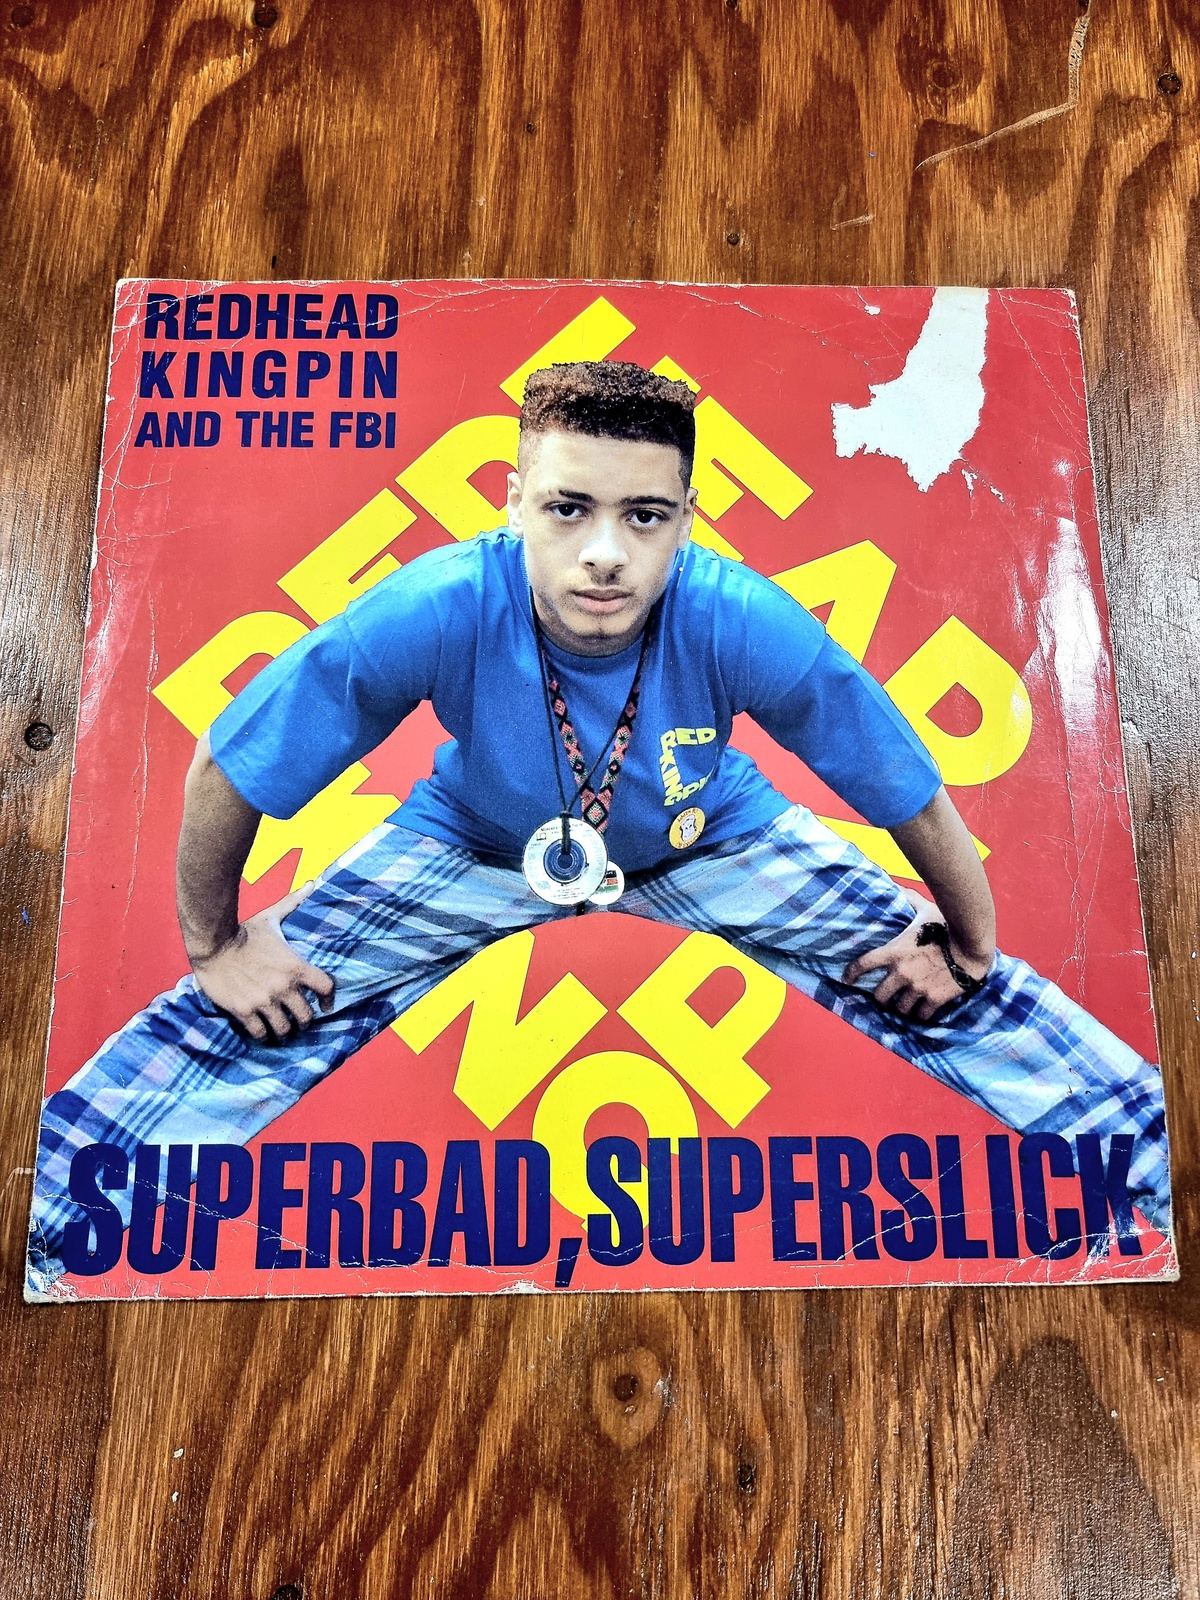 Redhead Kingpin and the FBI - Superbad, Superslick